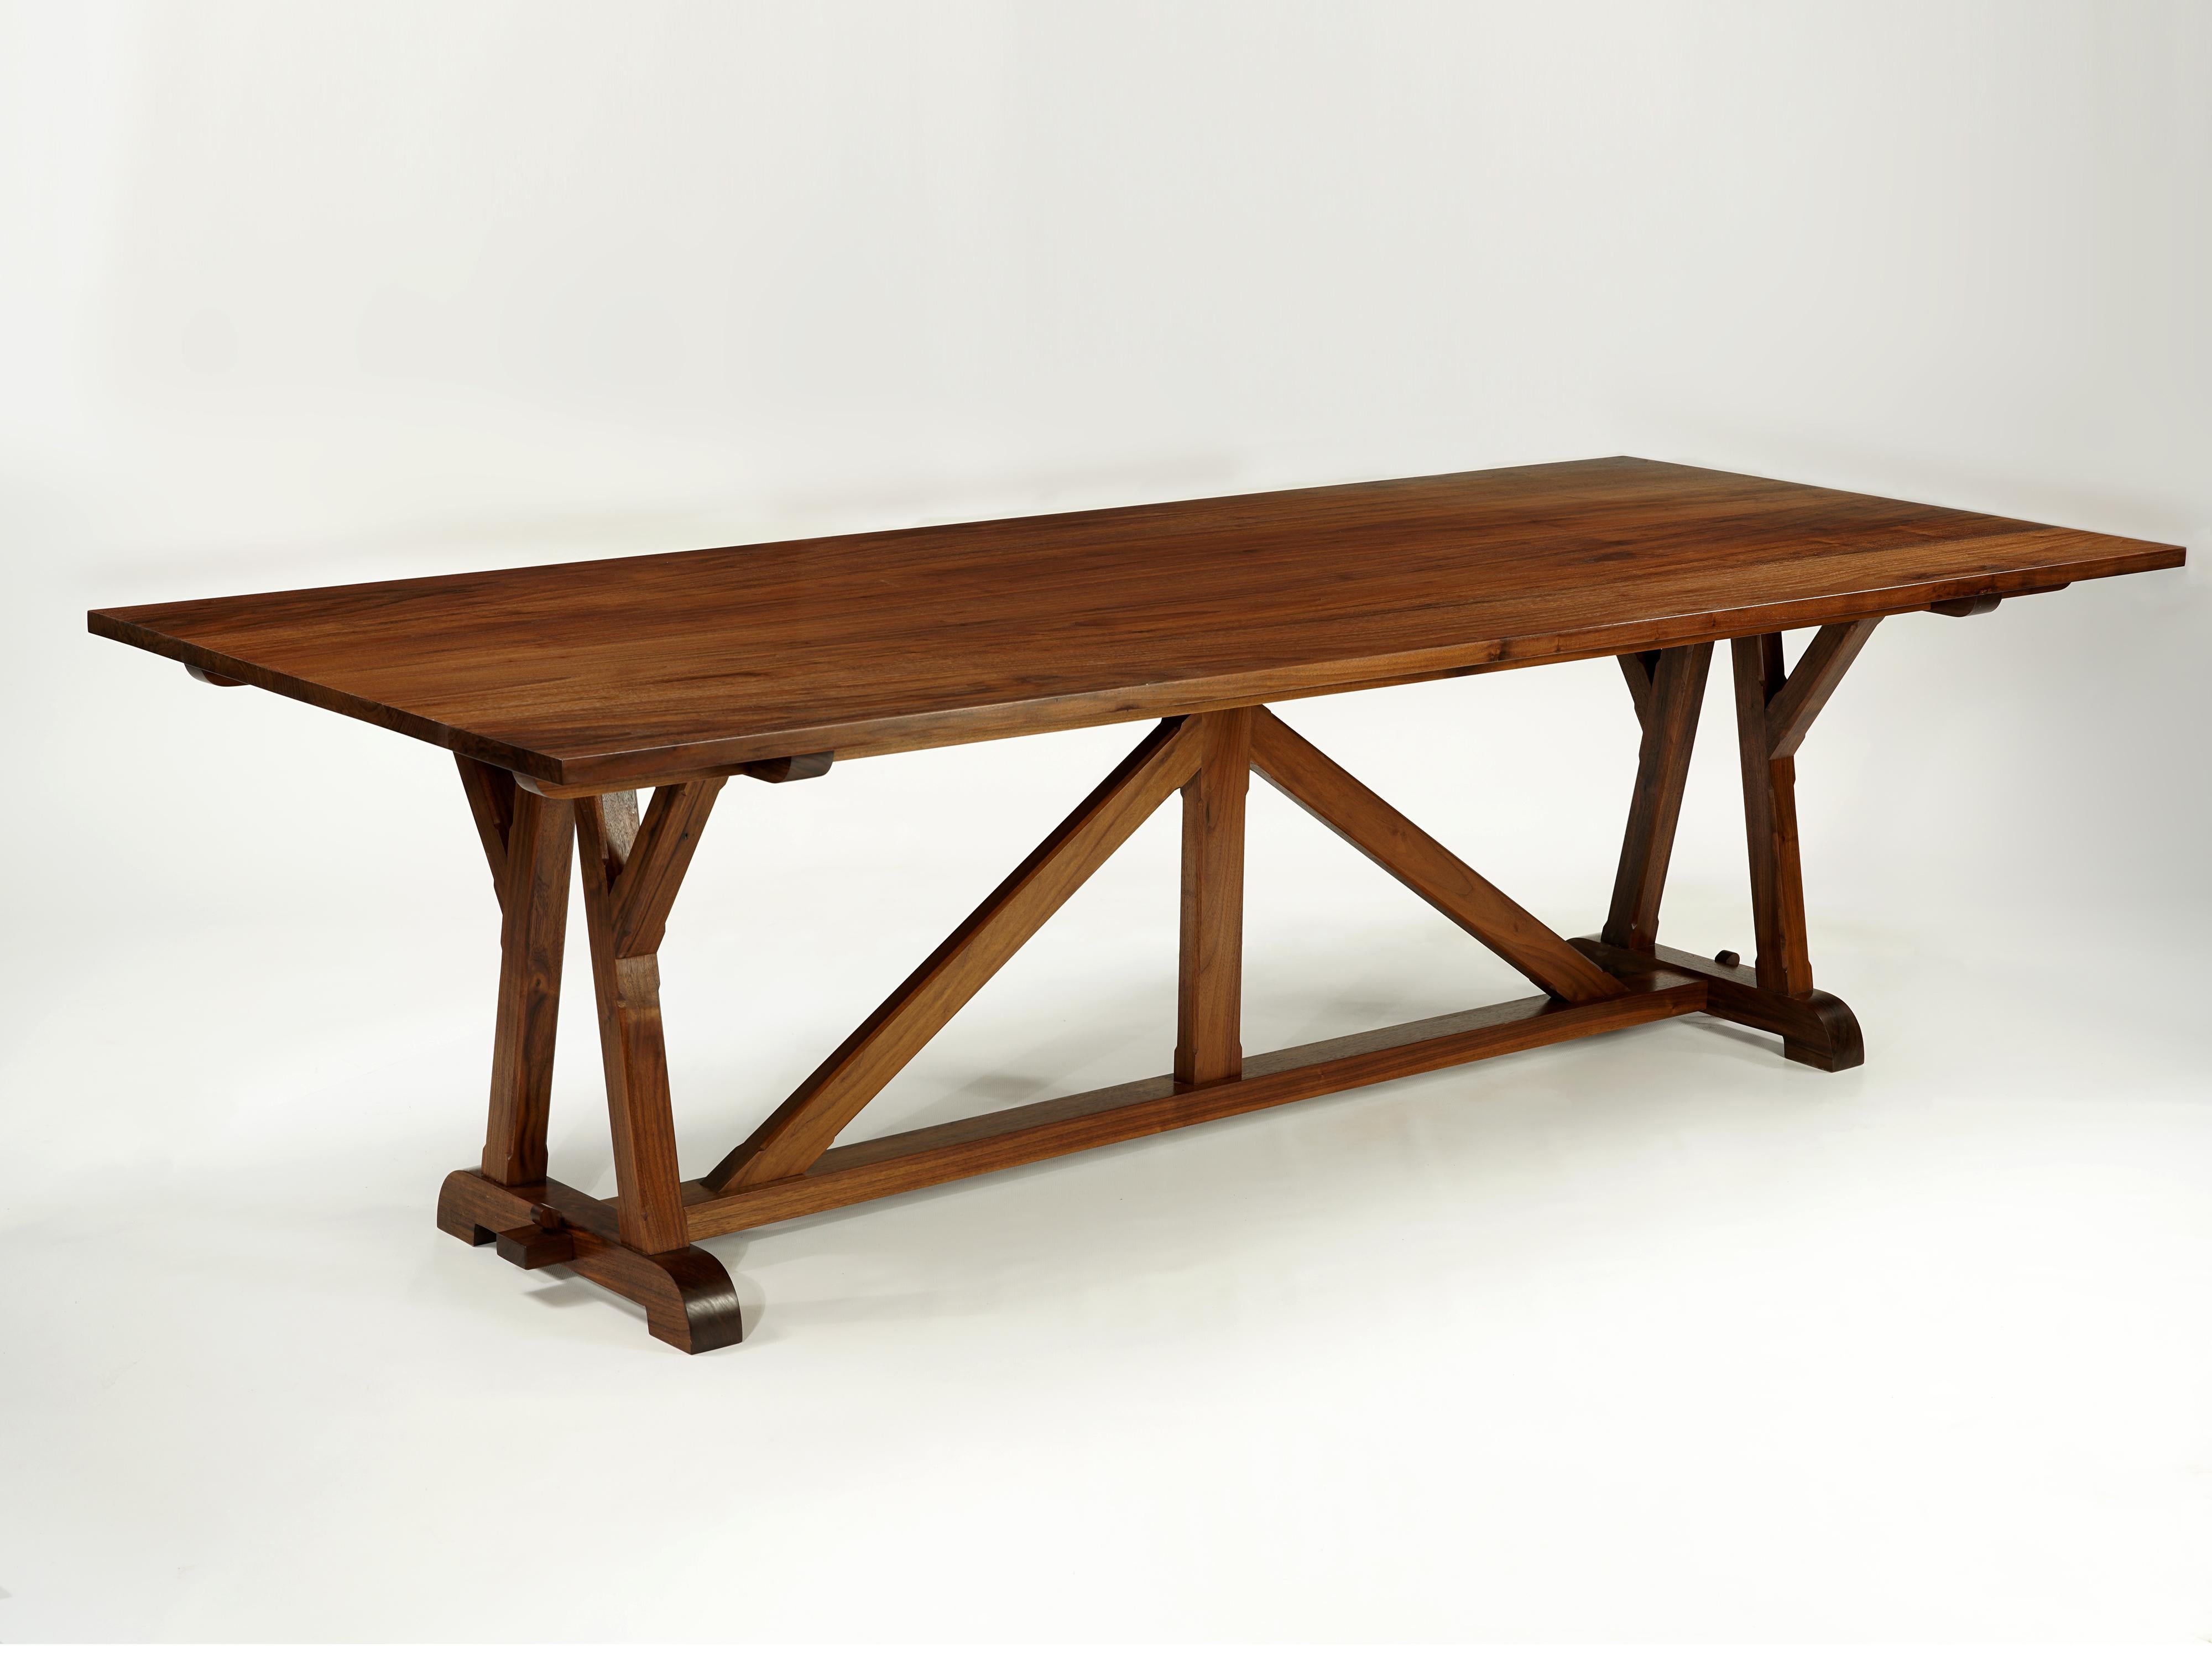 This classic design recalls timbered roof trusses used for centuries in
European churches and elsewhere. Exposed beams are connected using
traditional mortise and Tenon joints, forming variations of triangles
that give the rigidity necessary to